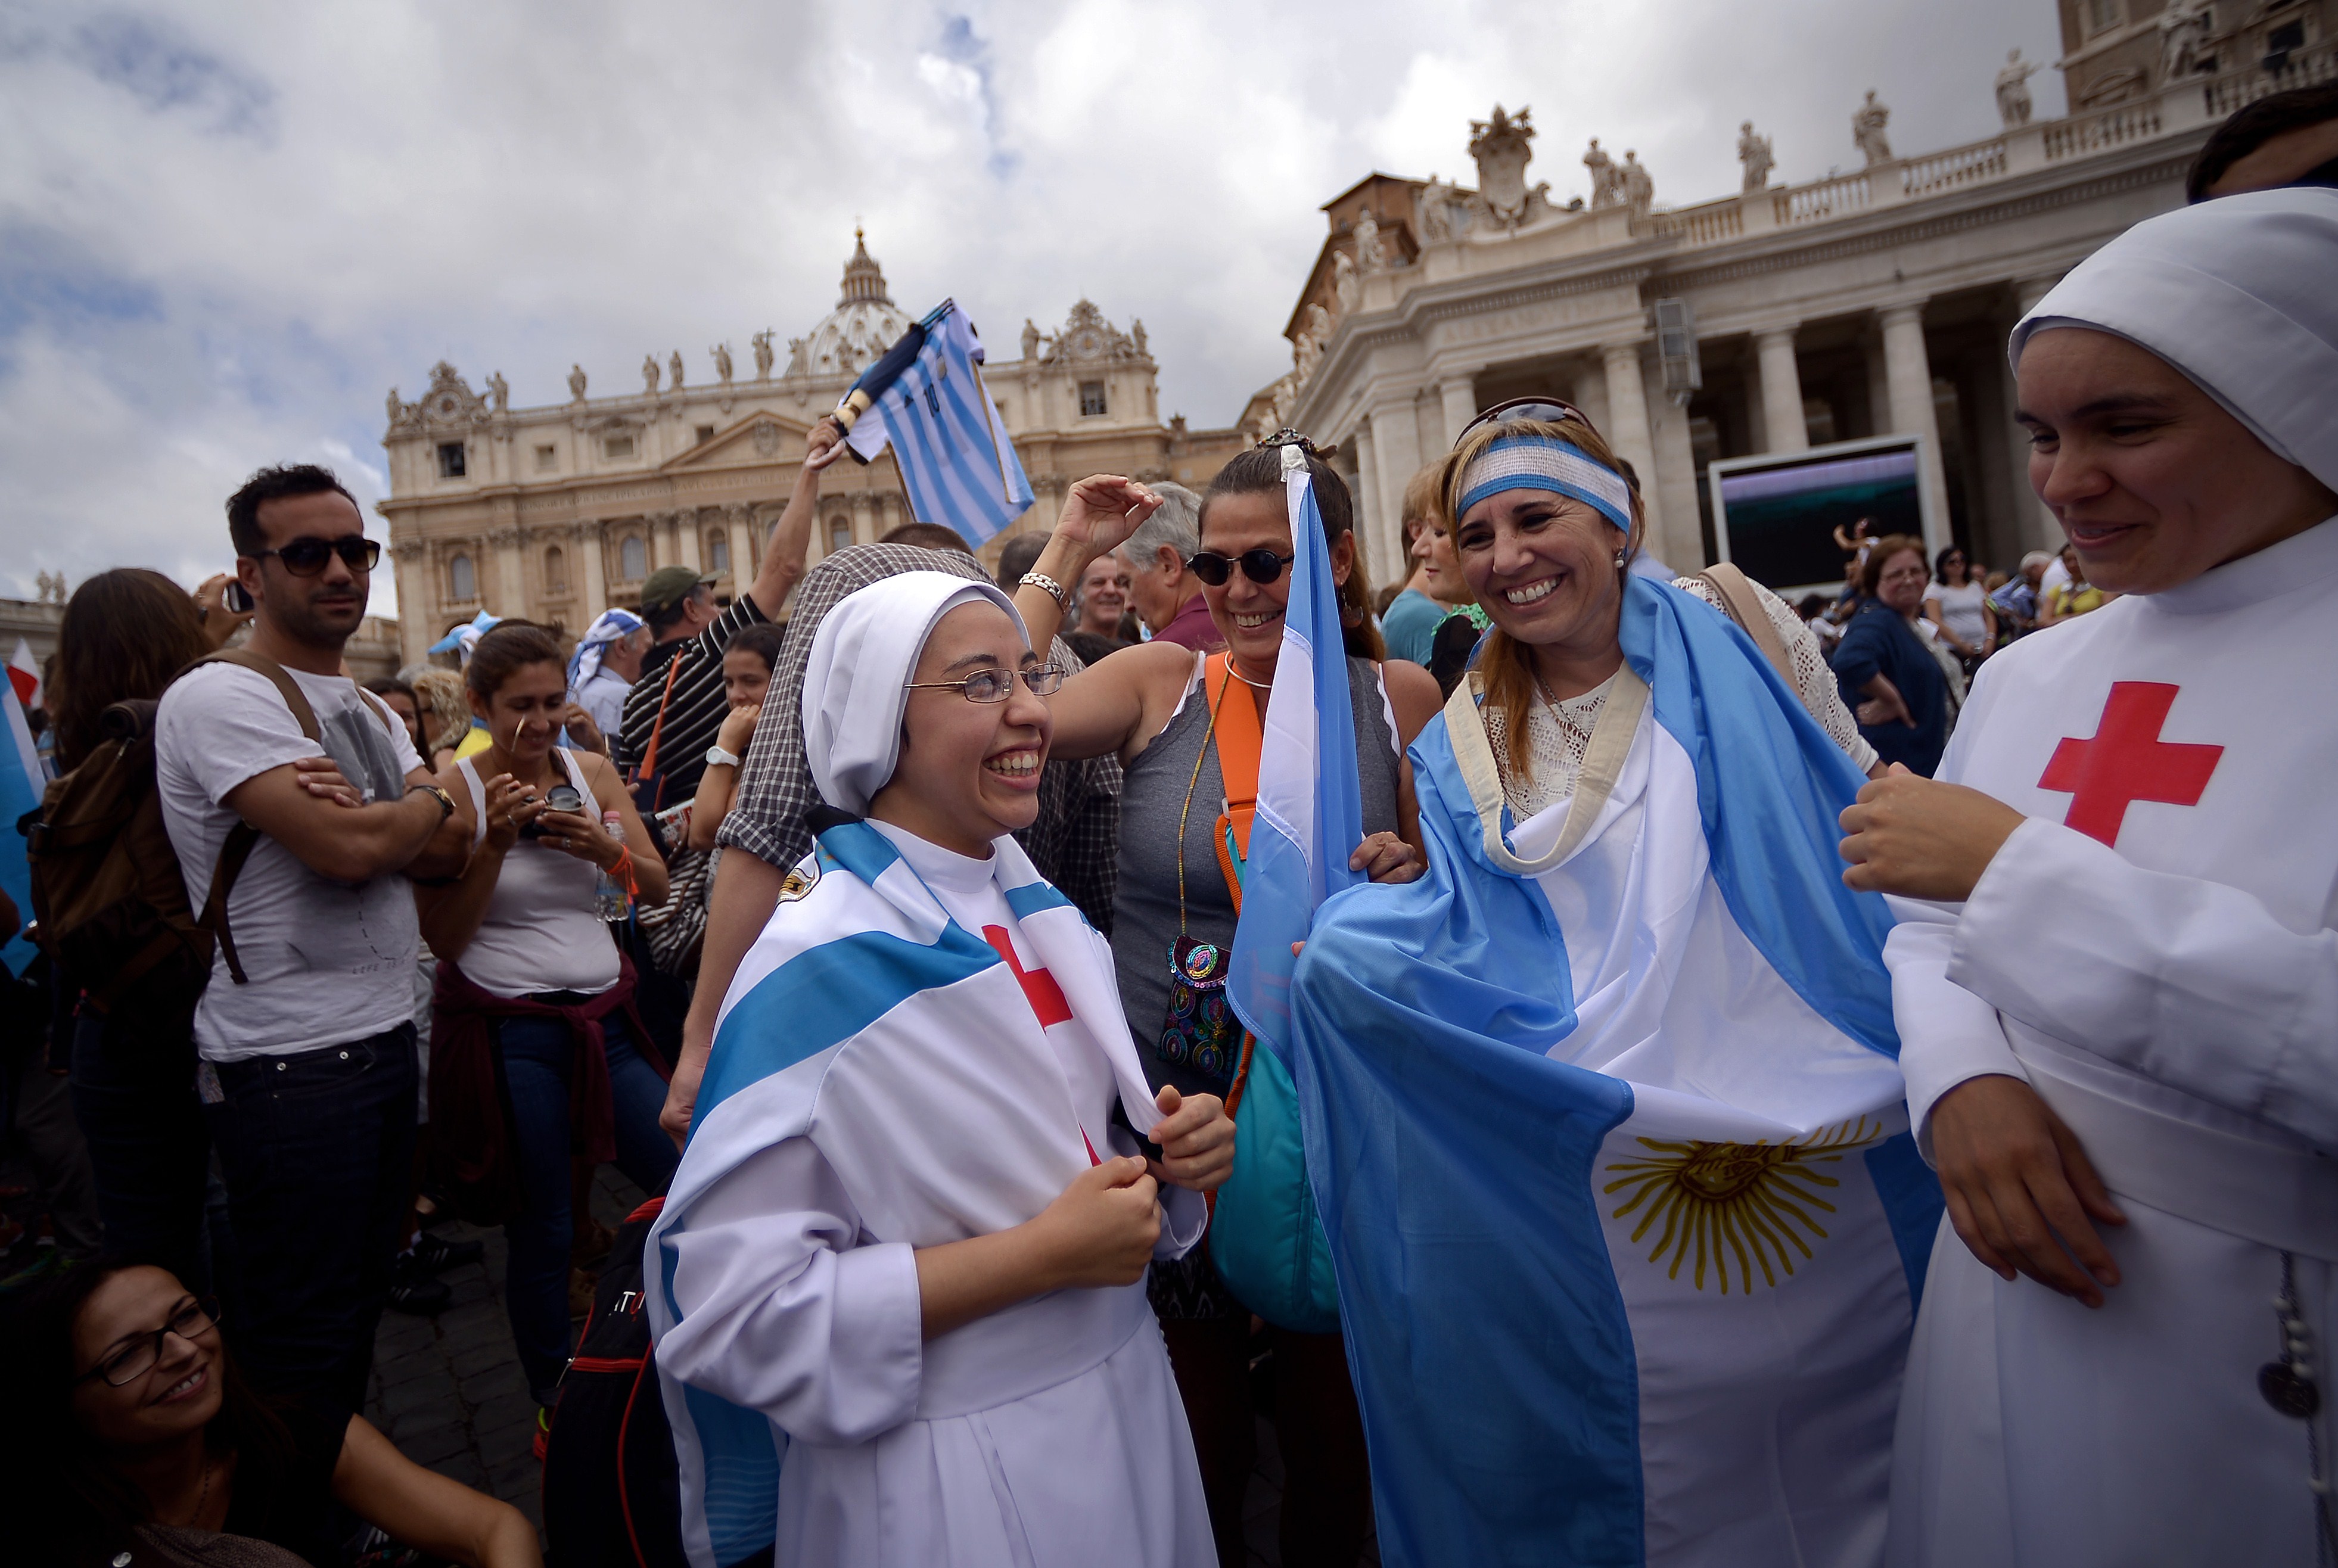 Nuns pose with the jersey of Argentinian football star Lionel Messi and flags prior Pope Francis Sunday Angelus prayer at St. Peter's Square on July 13, 2014 at the Vatican. (FILIPPO MONTEFORTE—AFP/Getty Images)